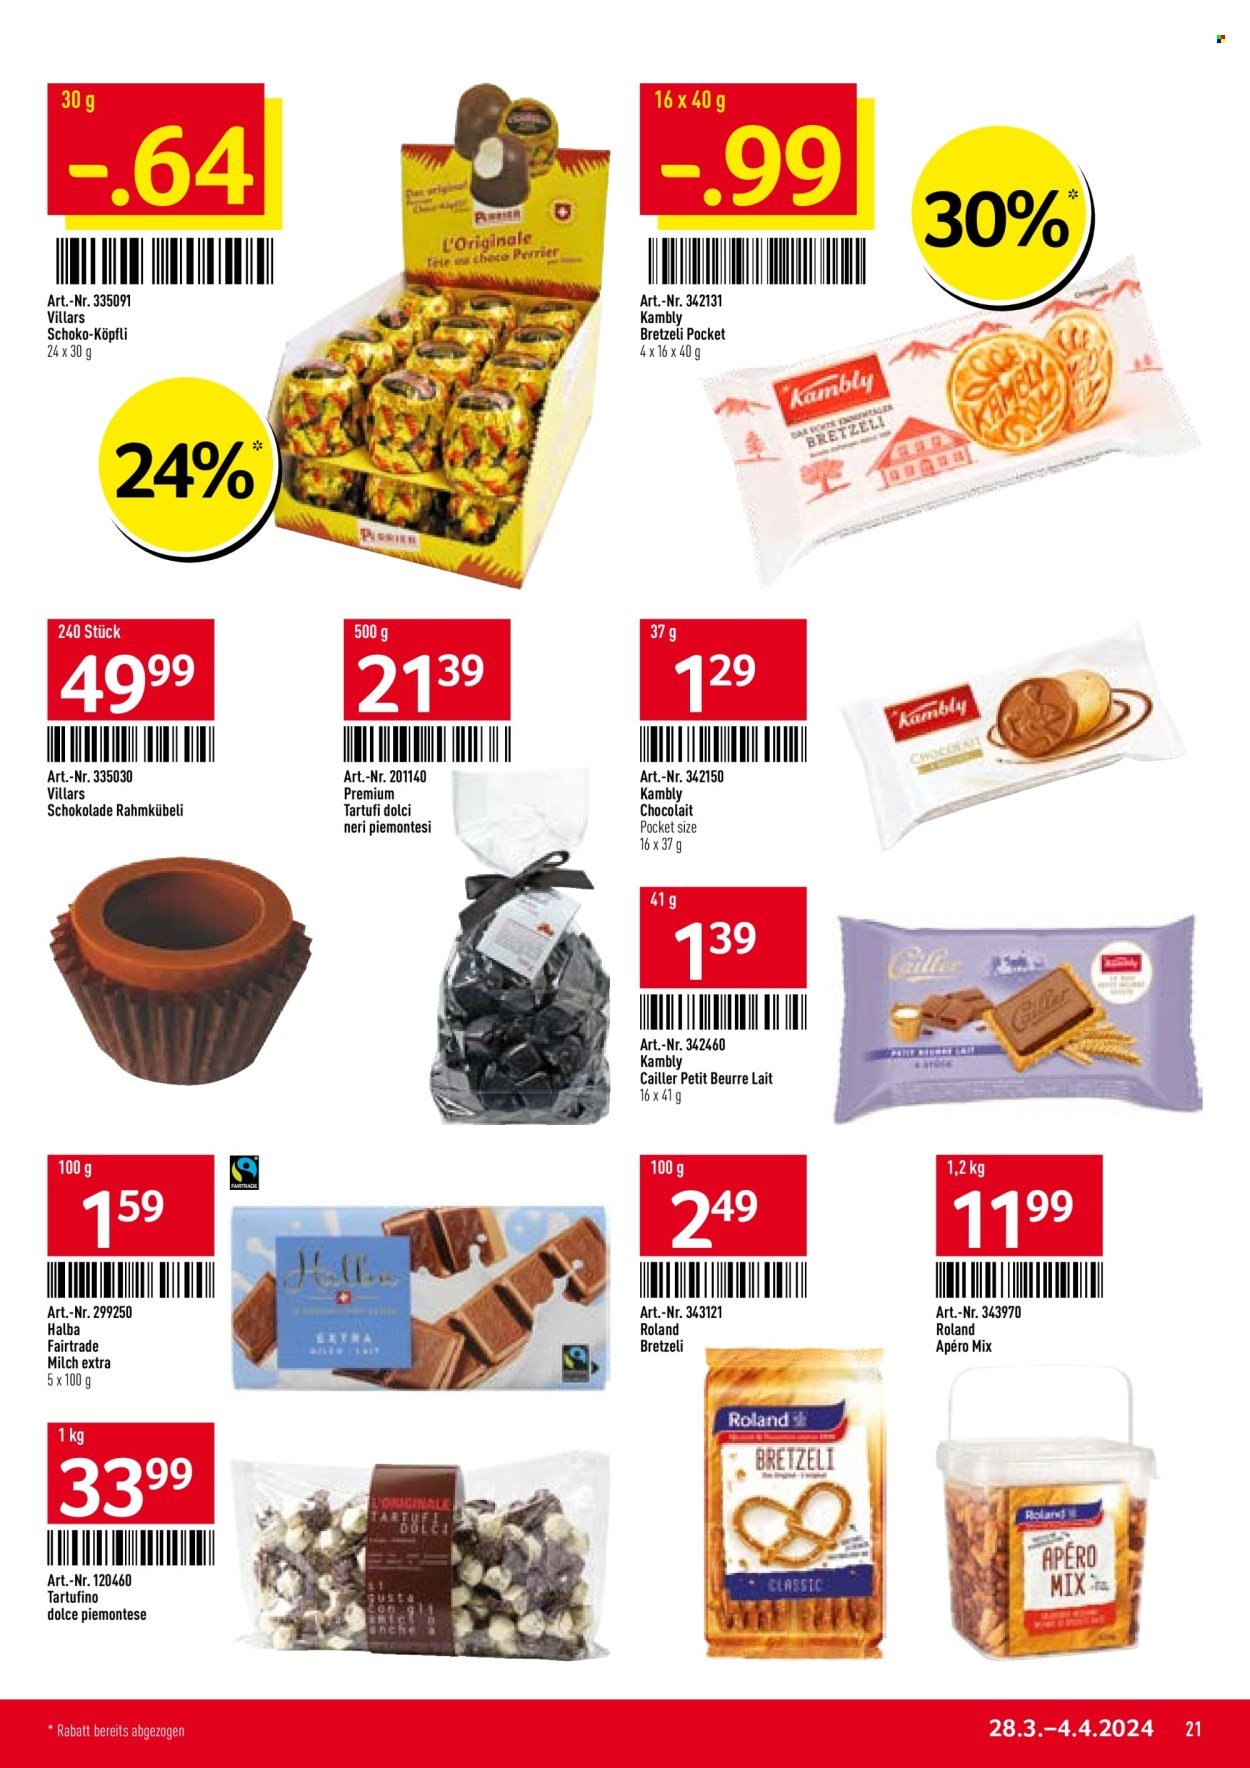 Catalogue TransGourmet - 29.3.2024 - 4.4.2024. Page 21.